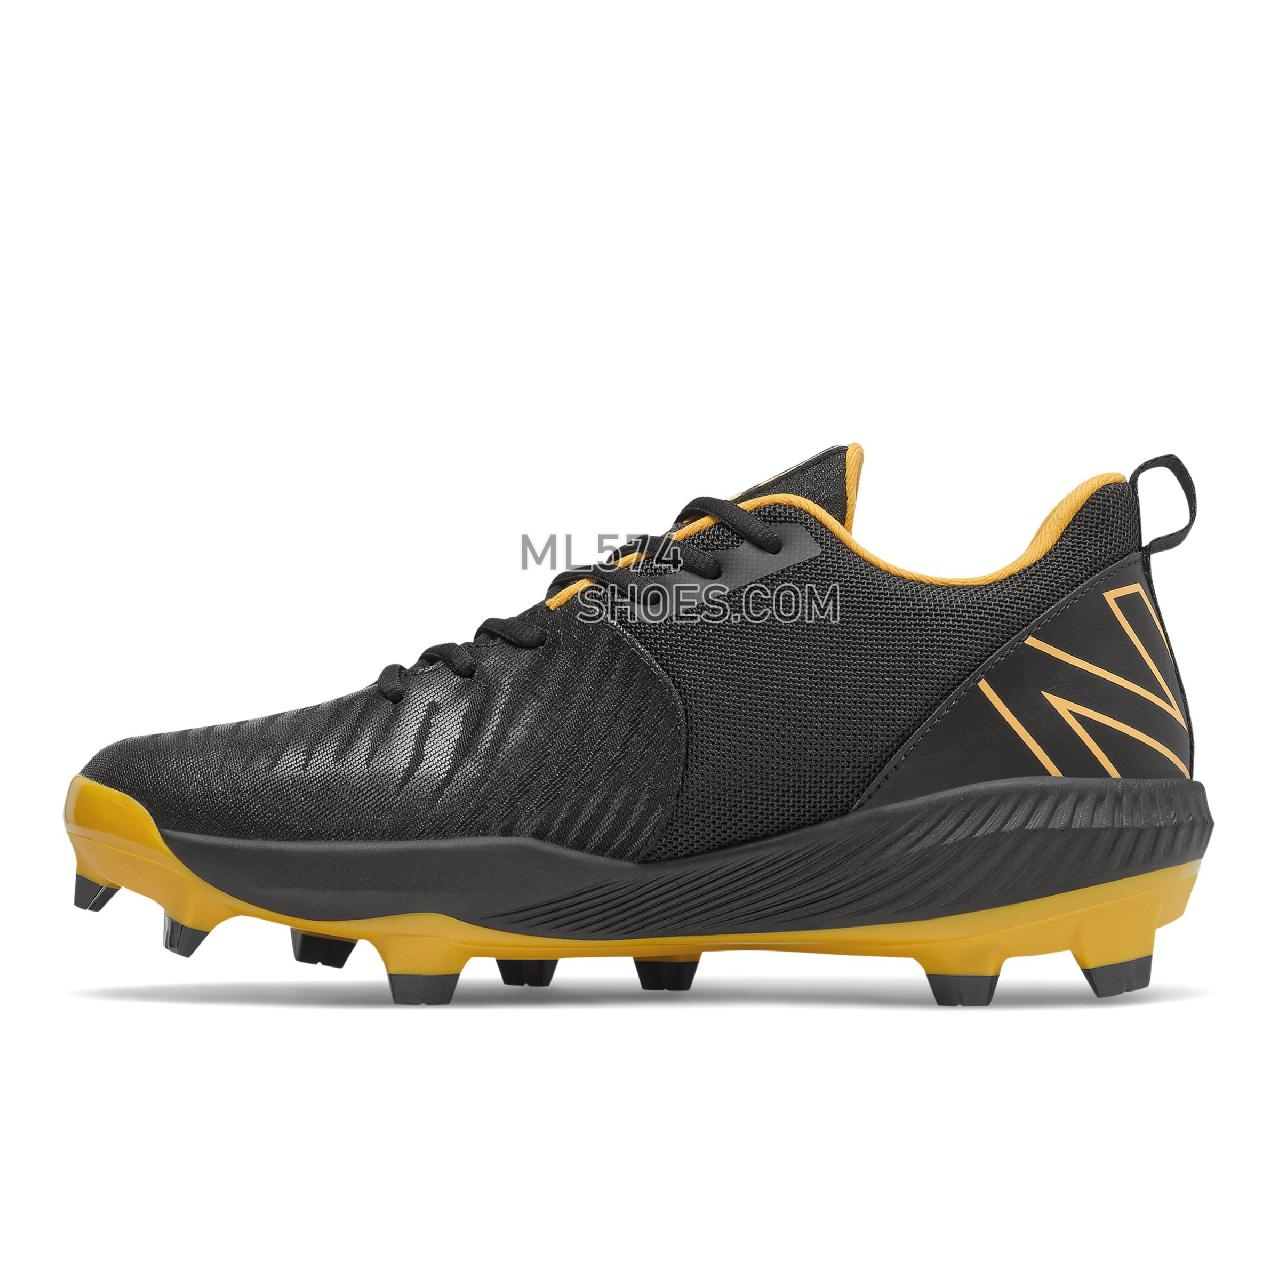 New Balance FuelCell 4040 v6 Molded - Men's Mid-Cut Baseball Cleats - Black with Yellow - PL4040Y6